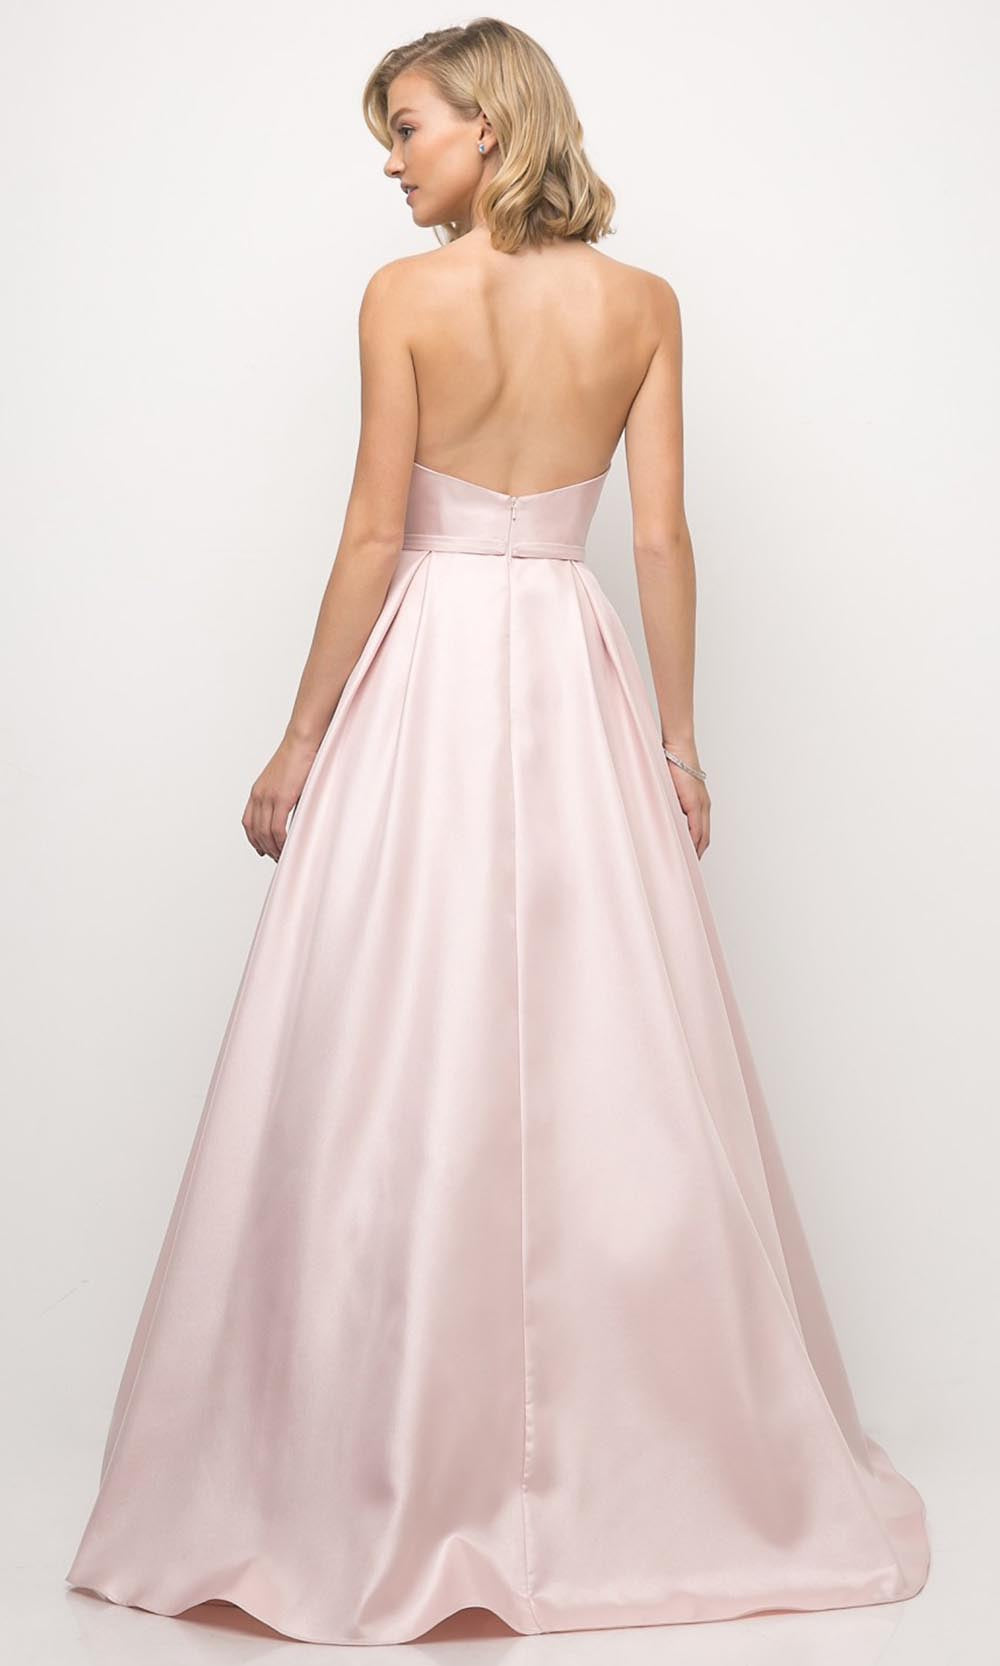 Cinderella Divine - UE008 Sweetheart A-Line Gown In Pink